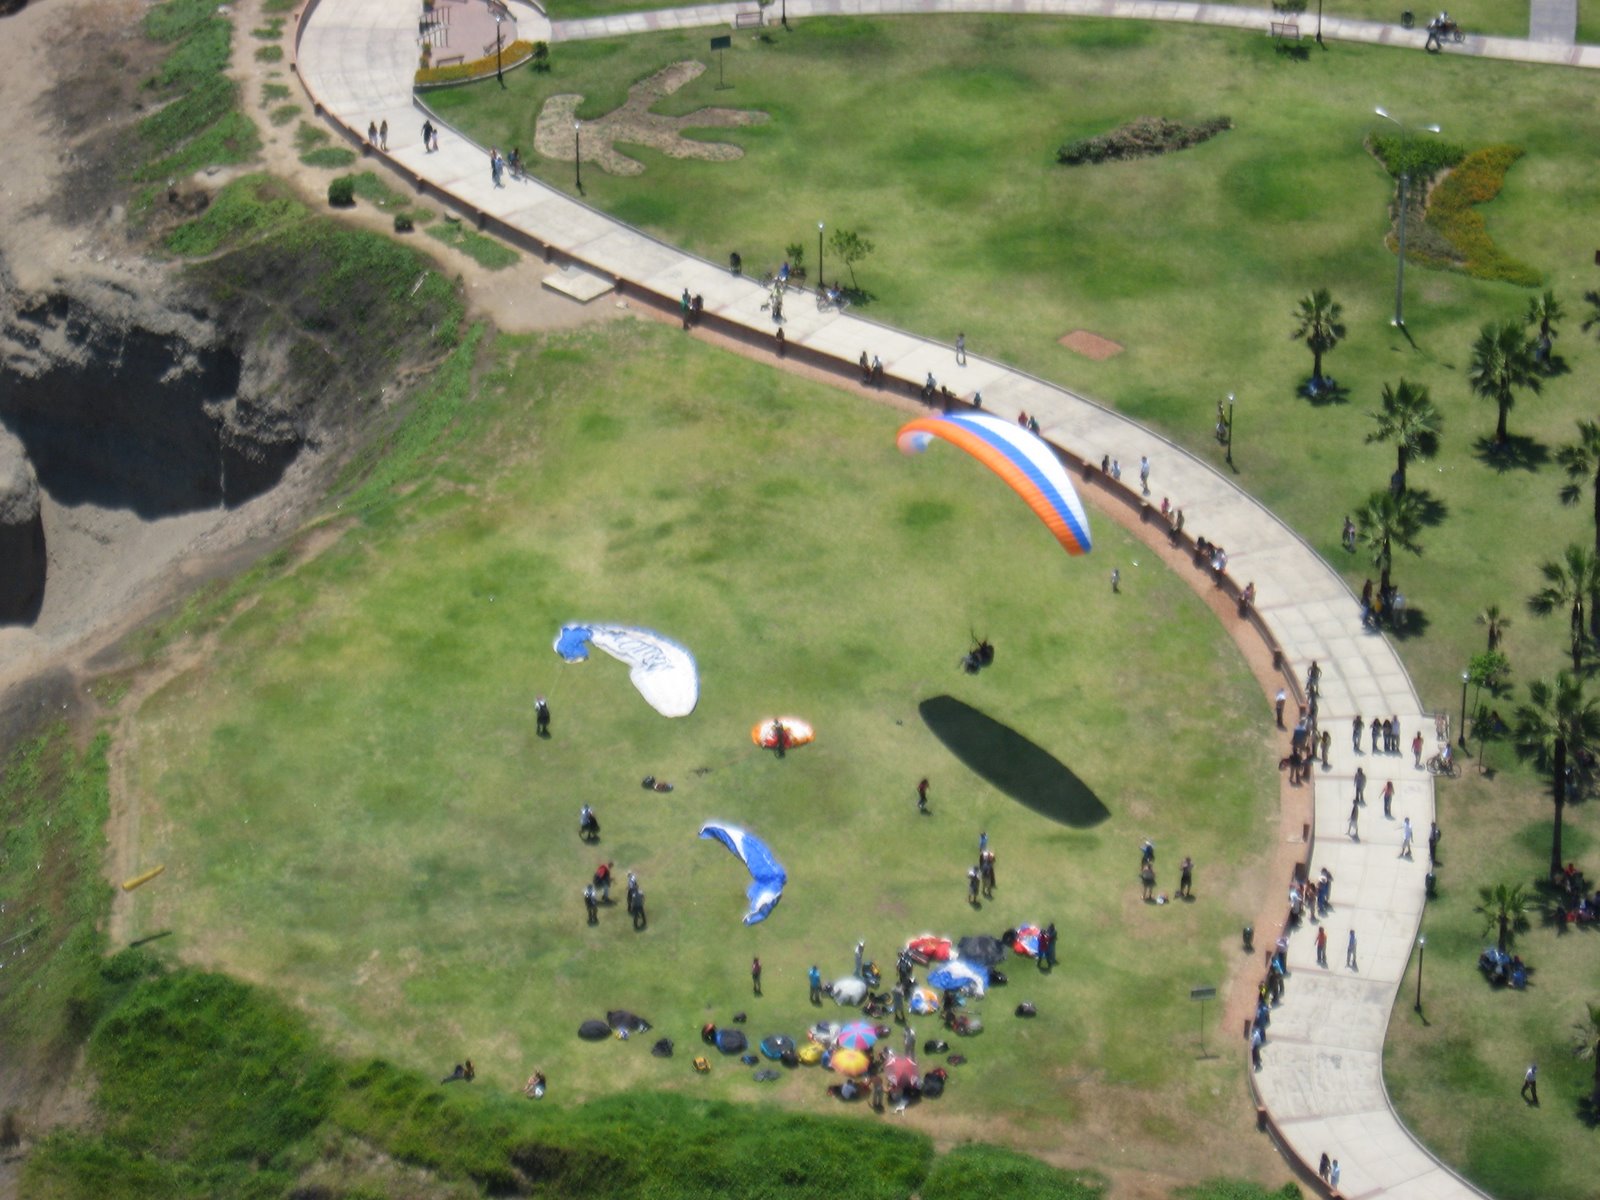 [Paragliding+launch+and+landing+area+on+Malecon.JPG]